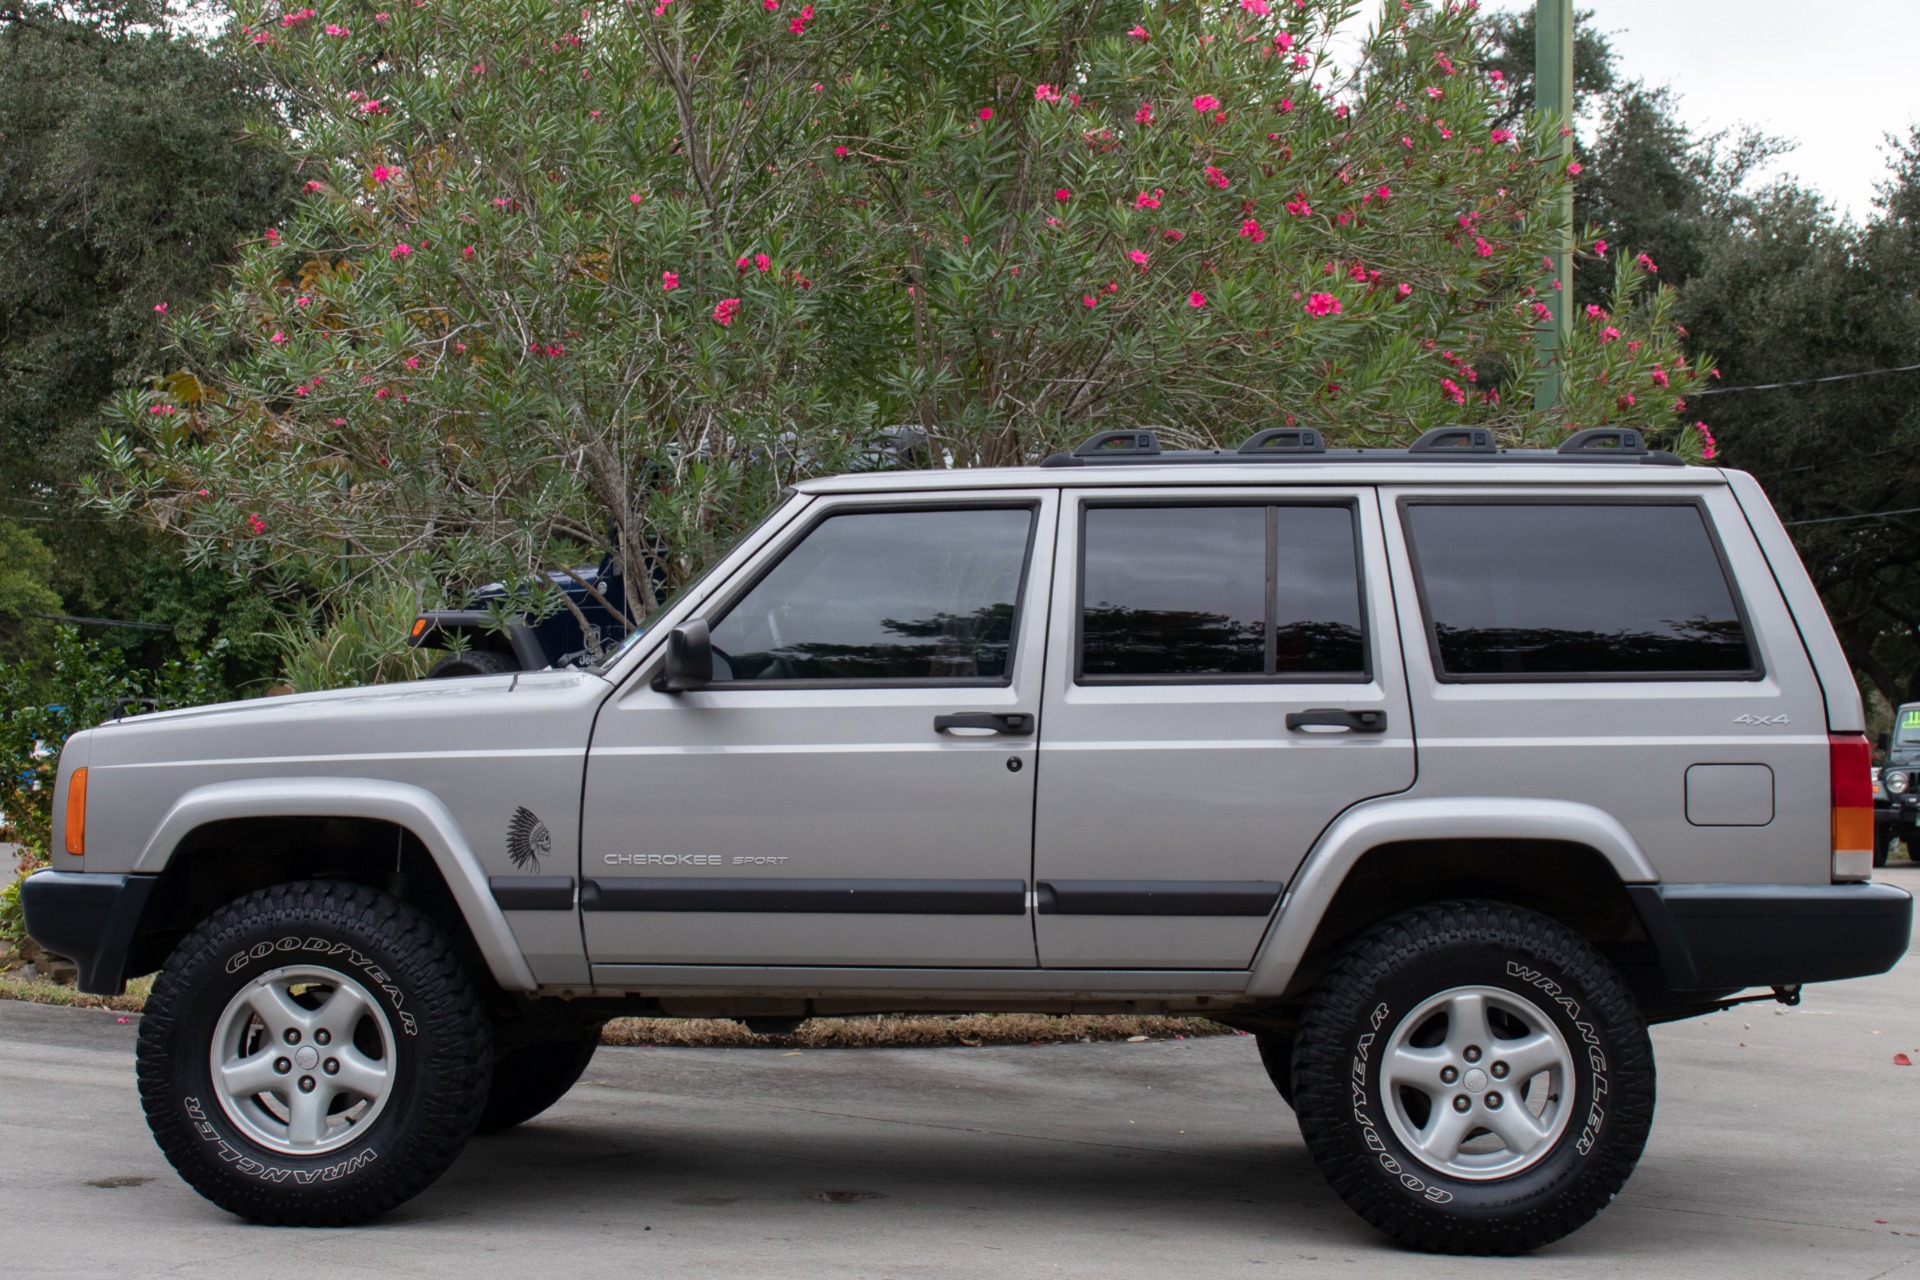 Used 2001 Jeep Cherokee Sport For Sale ($9,995) | Select Jeeps Inc